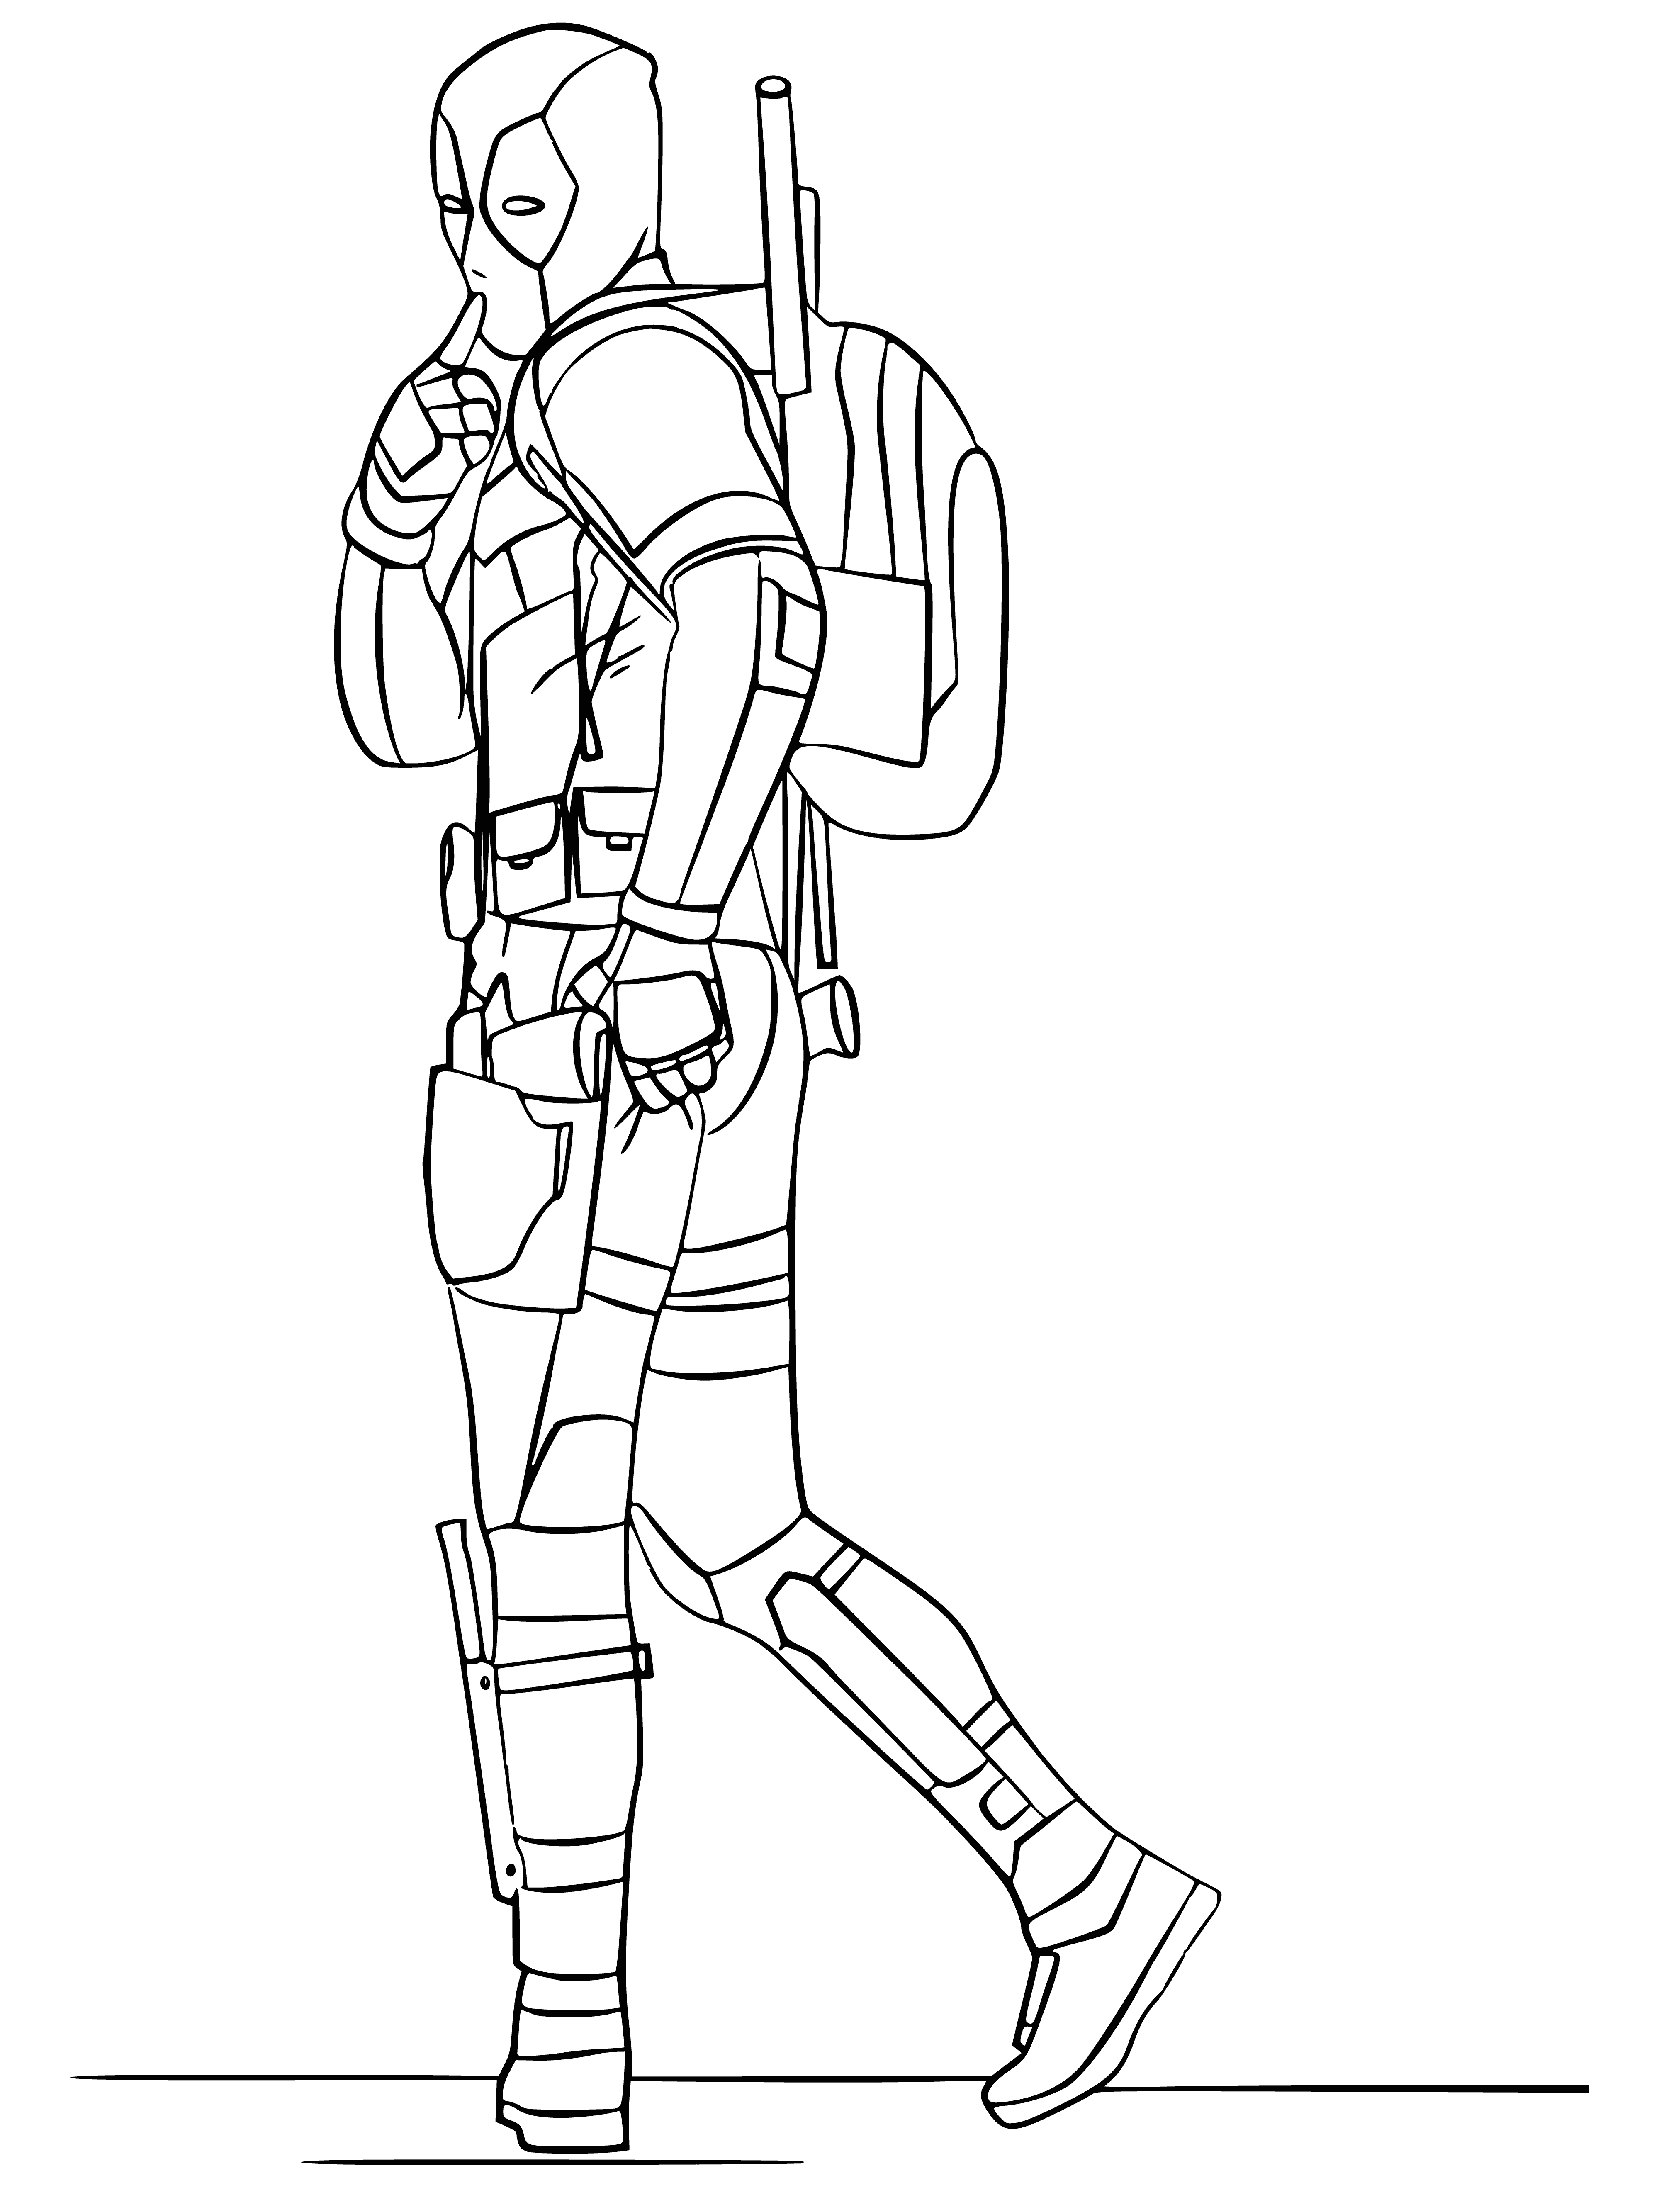 Deadpool coloring page